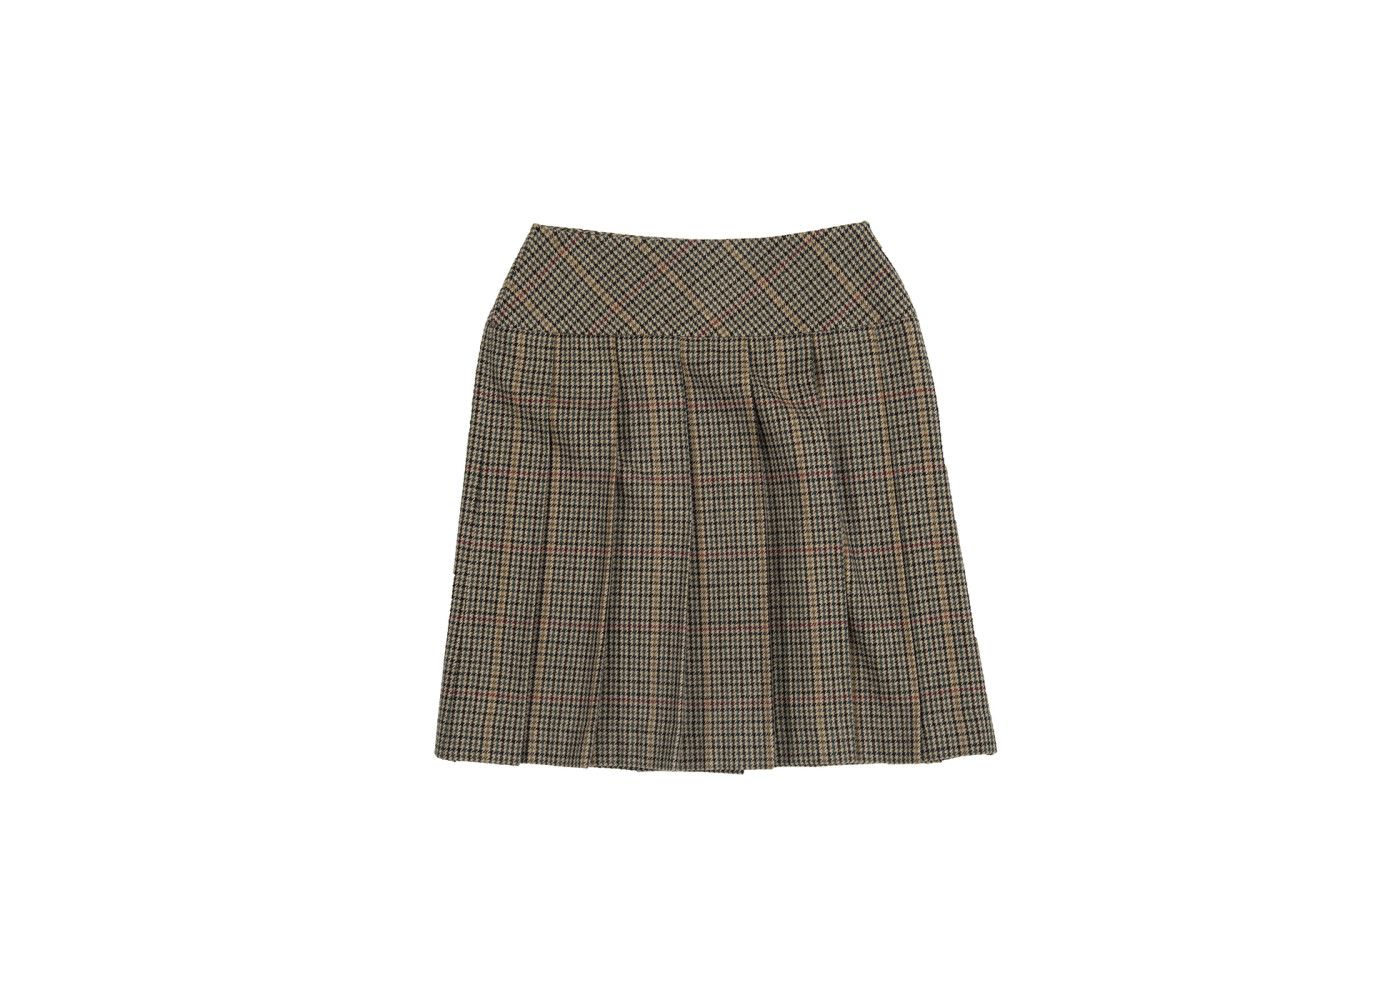 Hipster Pleated Skirt in Green Yellow Red Check Tweed - Mini Length